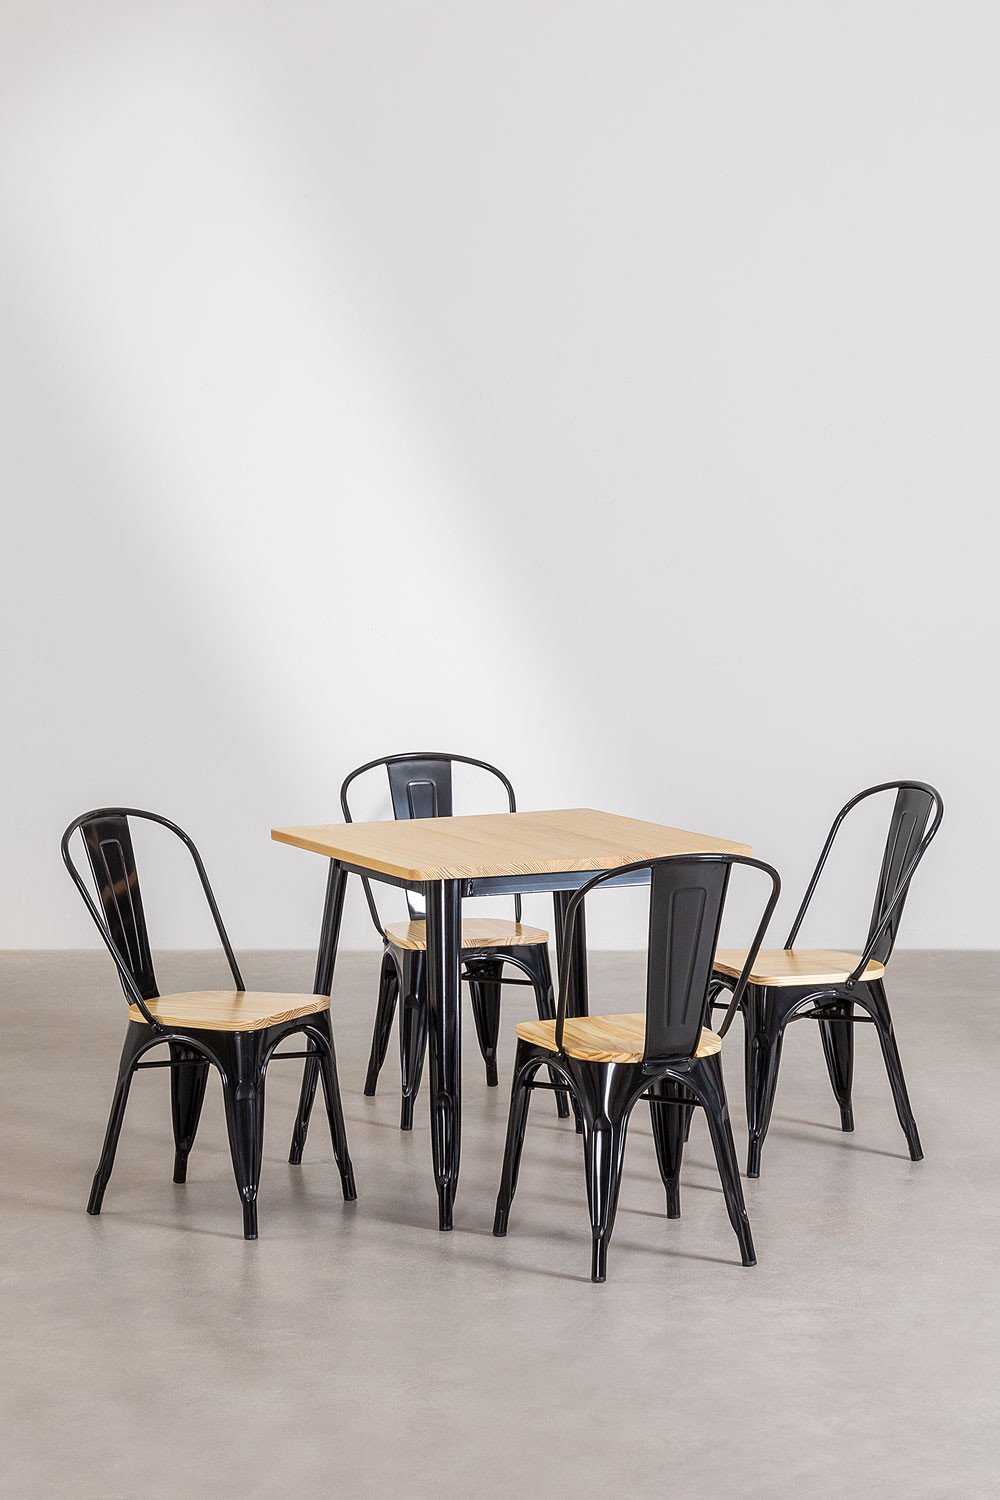 Pack of LIX Wood Table (80x80) and 4 LIX Wood Chairs , gallery image 2